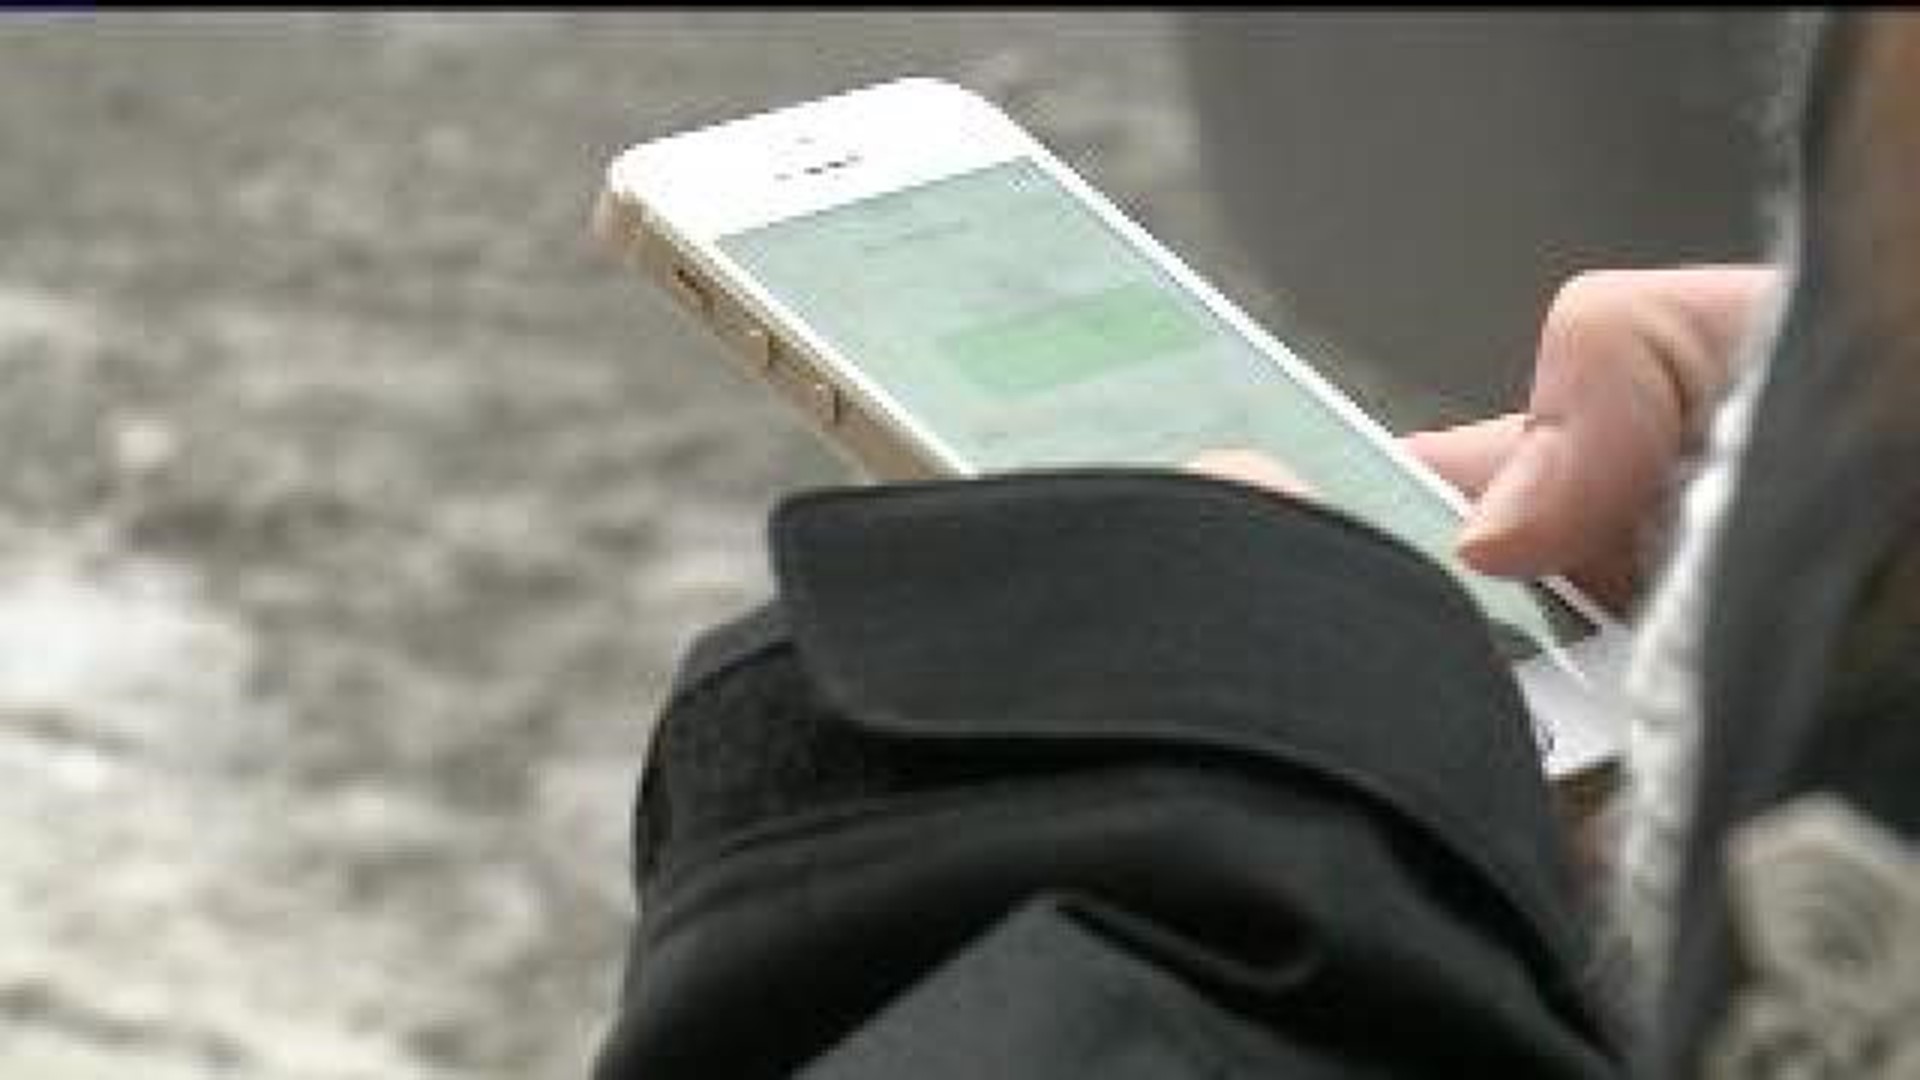 Cold weather could shorten phone battery life